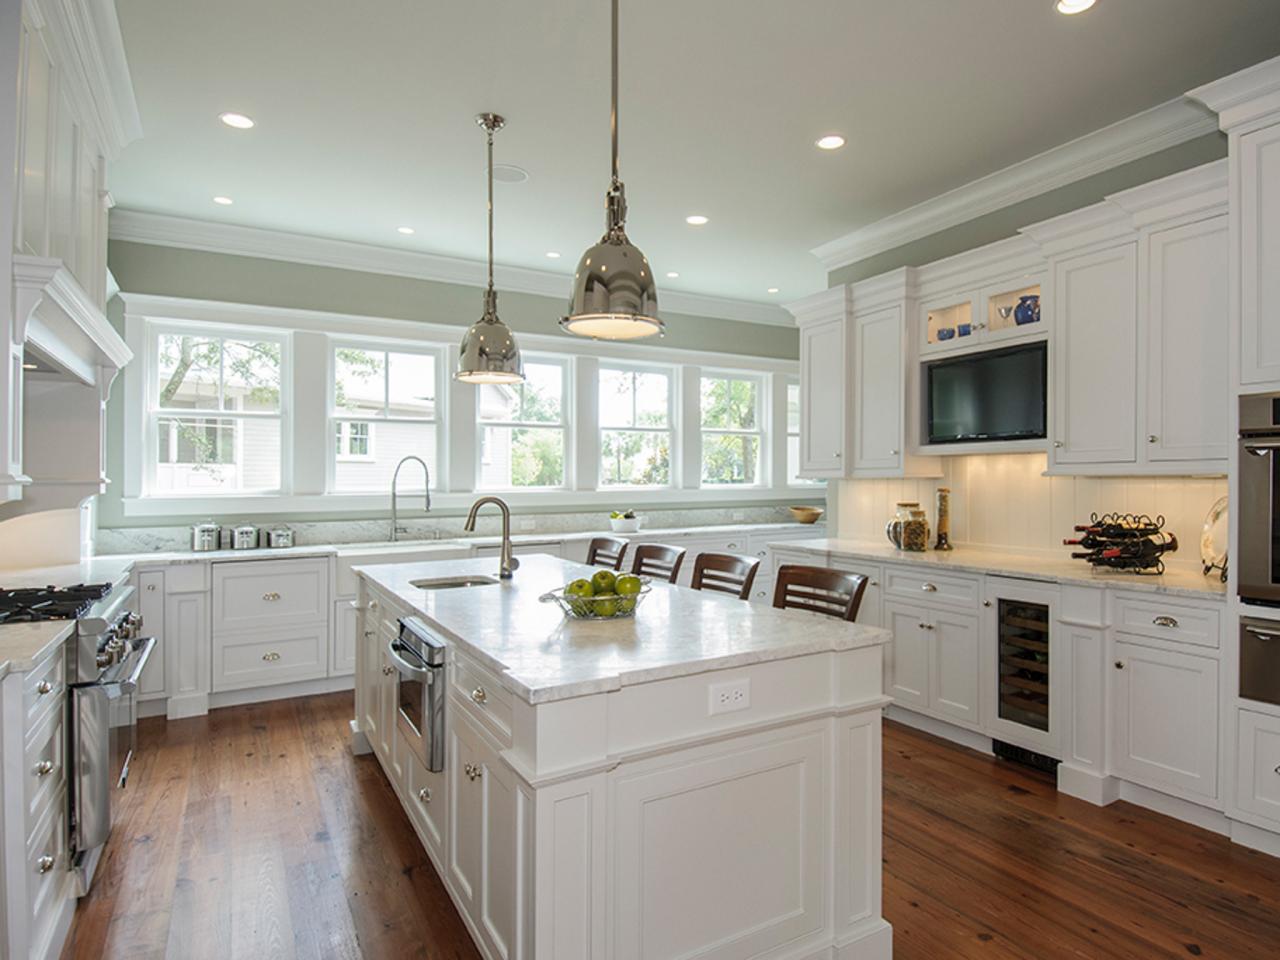 Painting Kitchen Cabinets Antique White, Best Countertop Color For Off White Cabinets